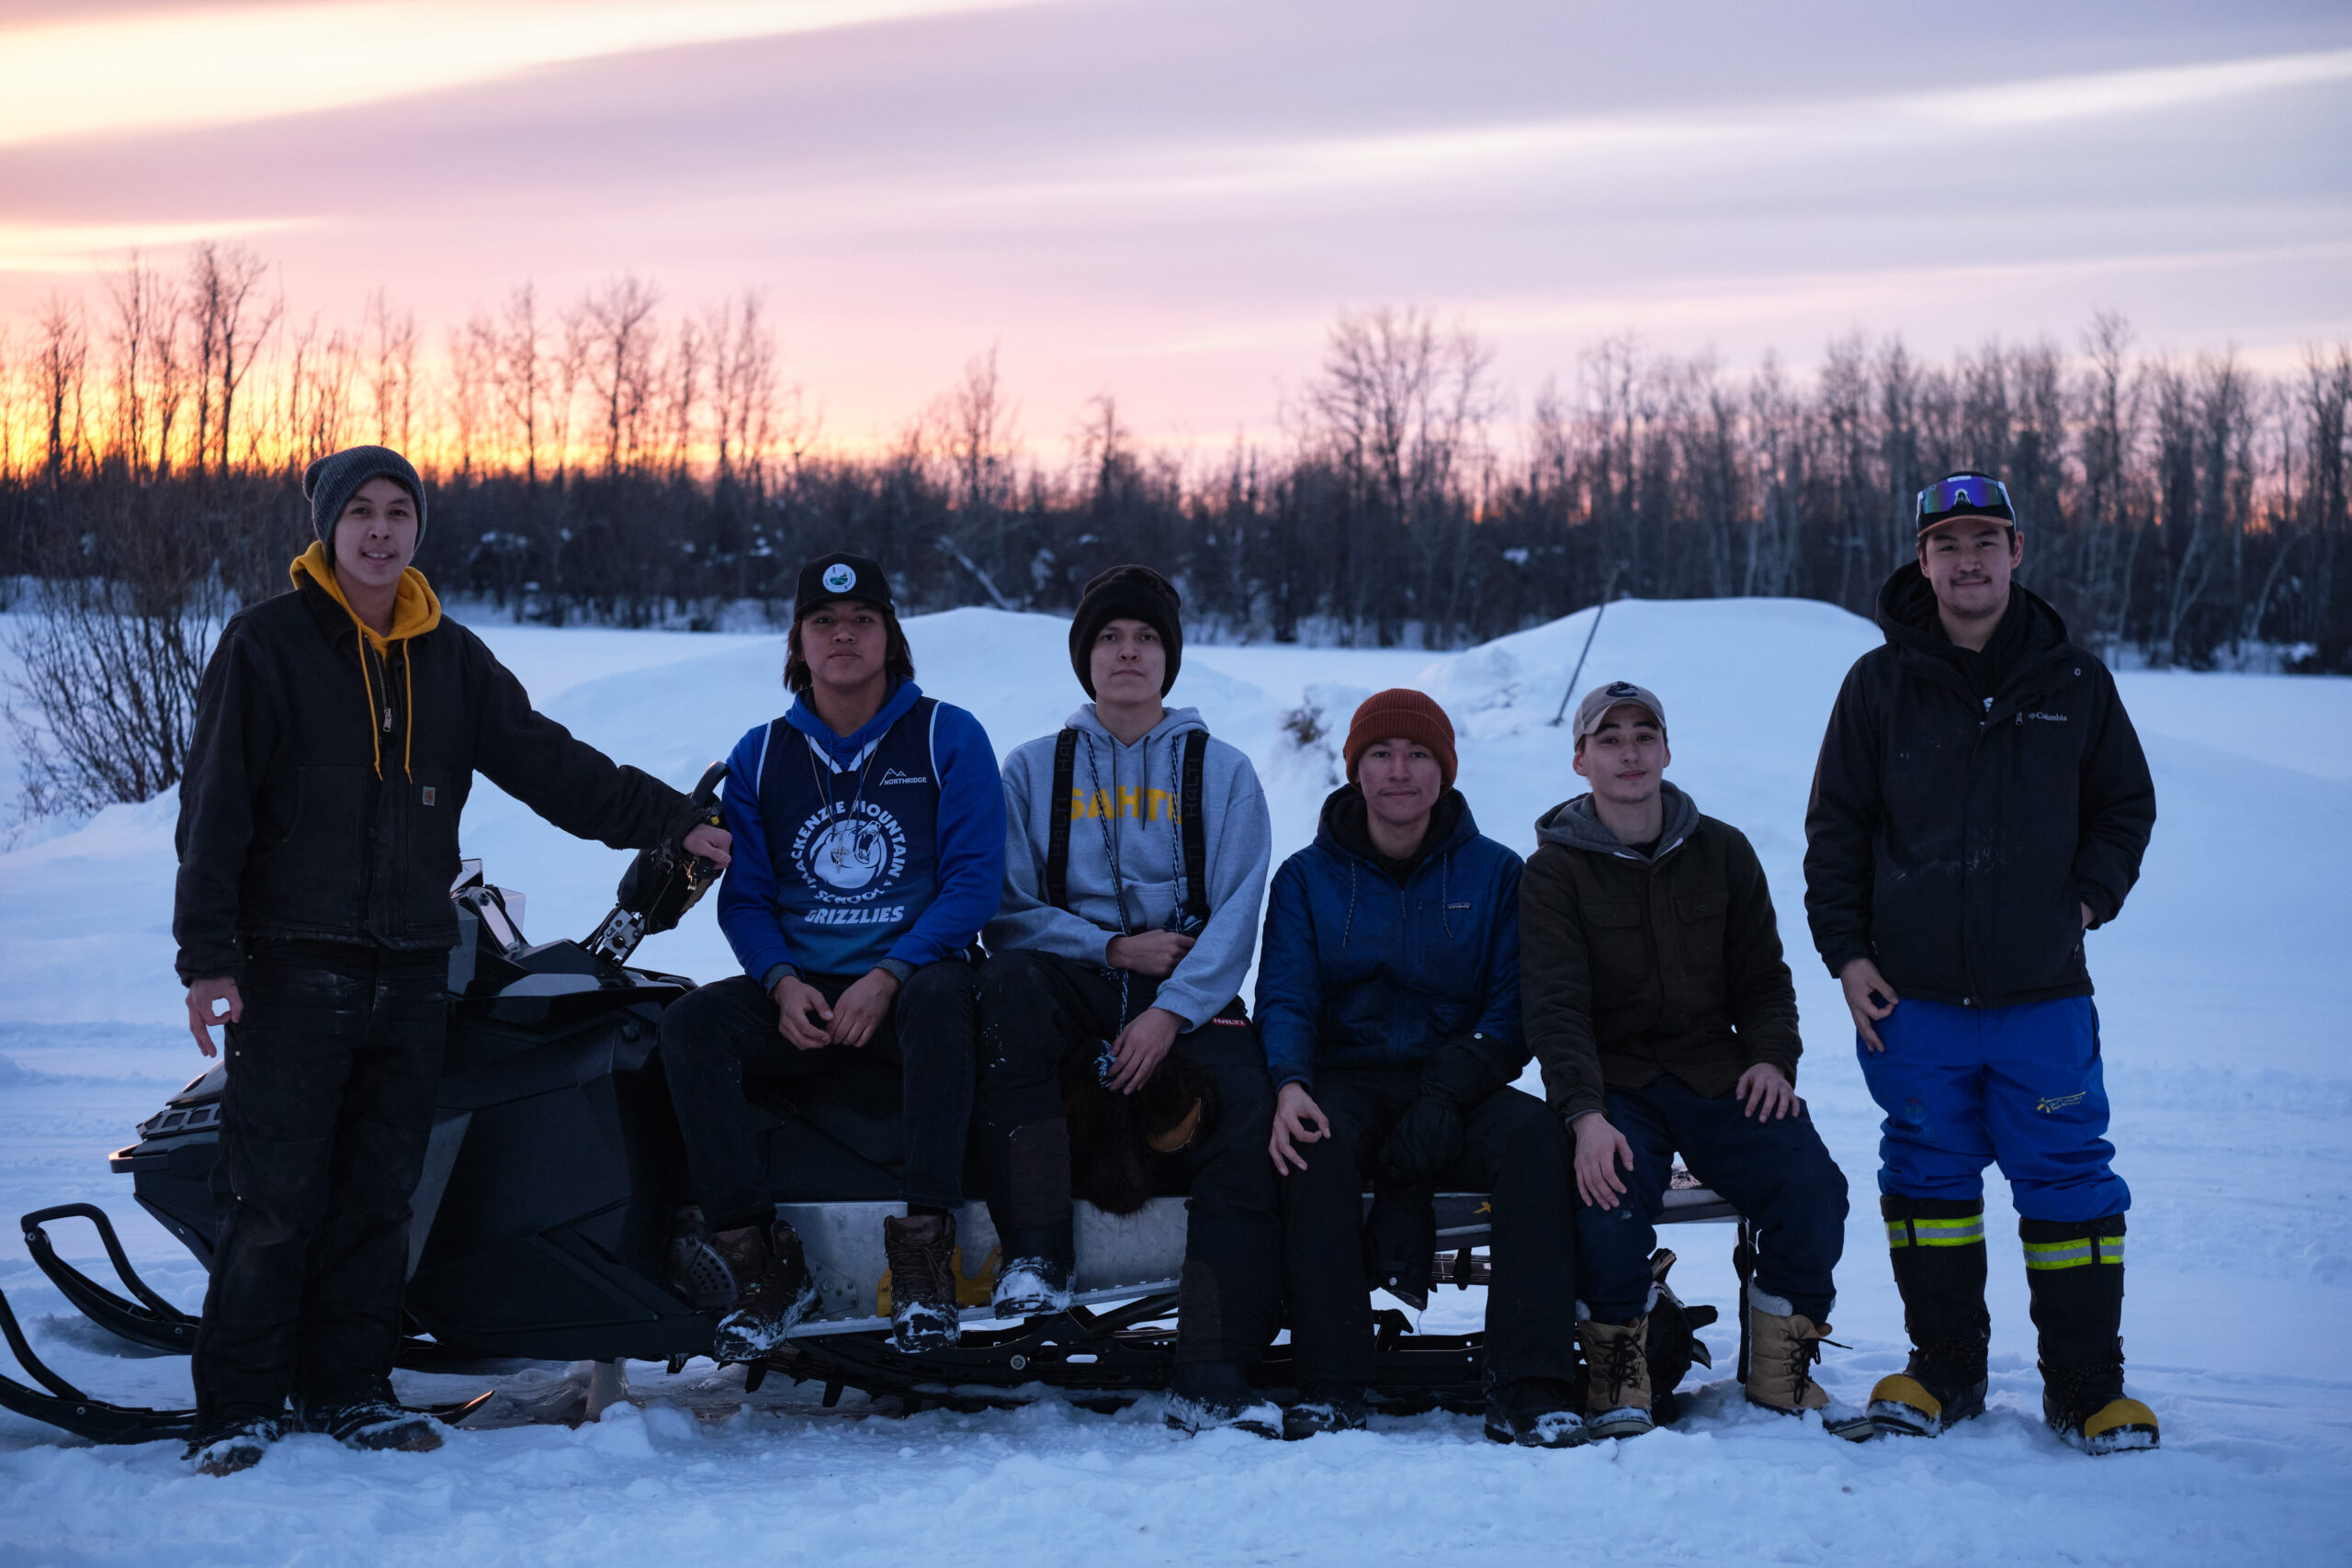 Six young people in a row, some standing, some sitting on a snow machine, in a snowy field with the sun setting in the background.